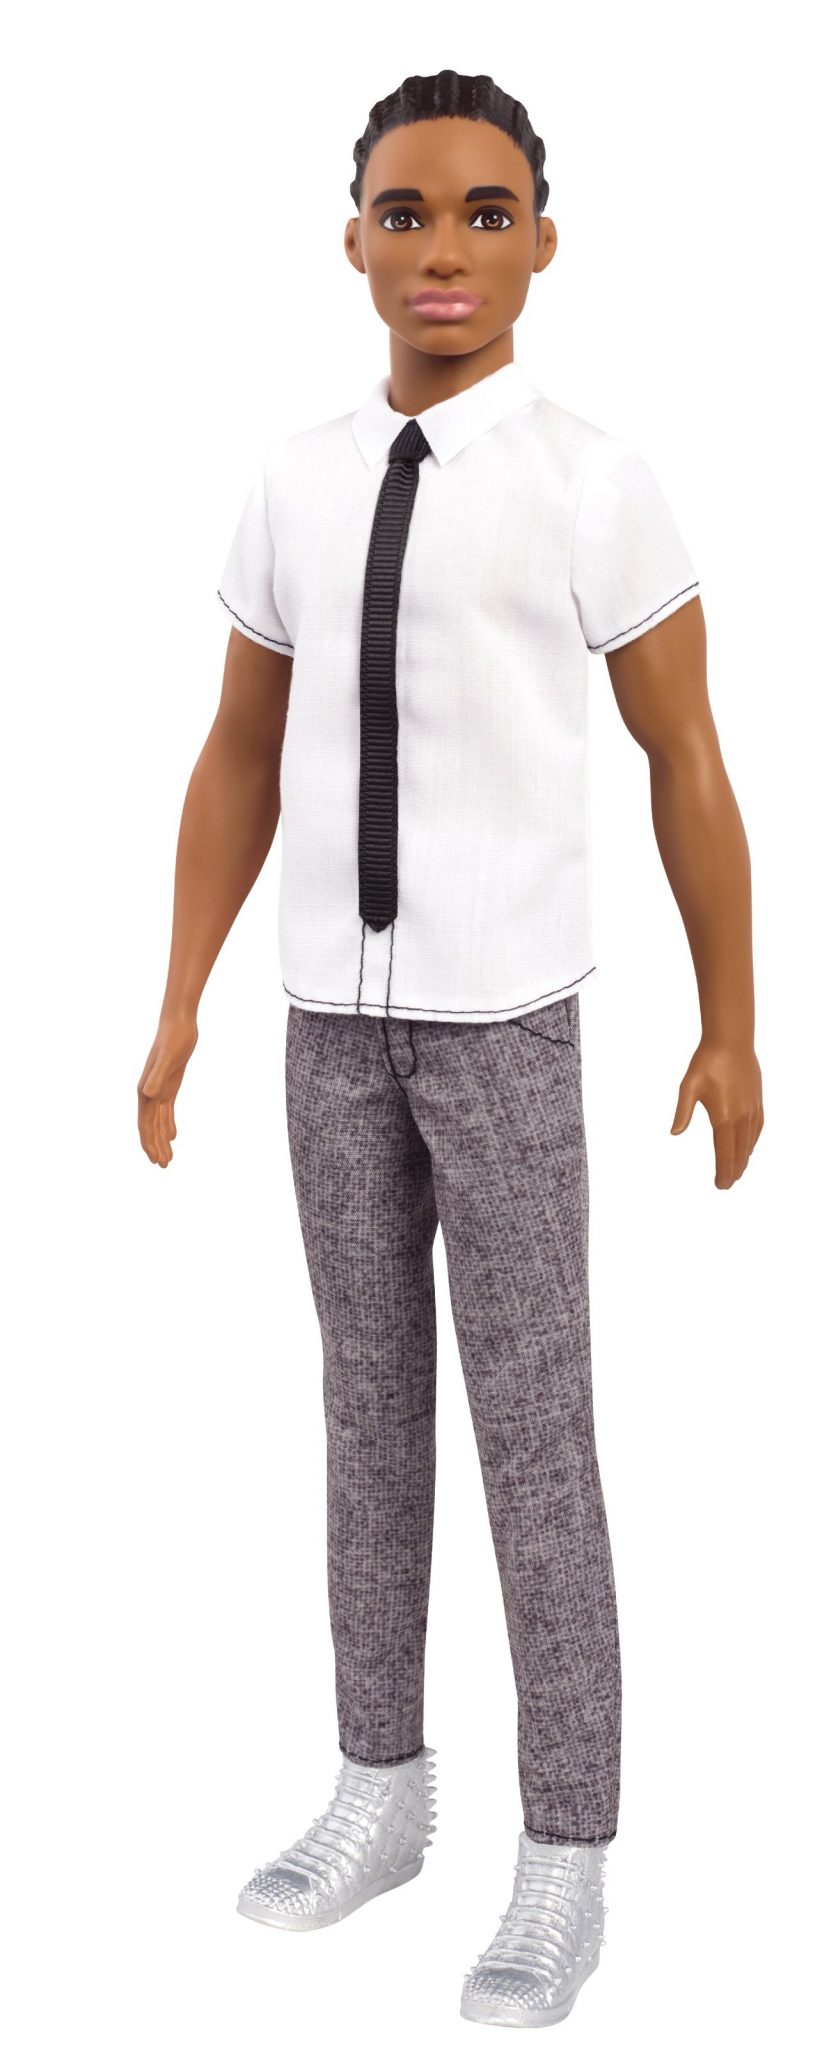 Ken gets the ‘brother’ makeover: Barbie® Brand shows commitment to diversity